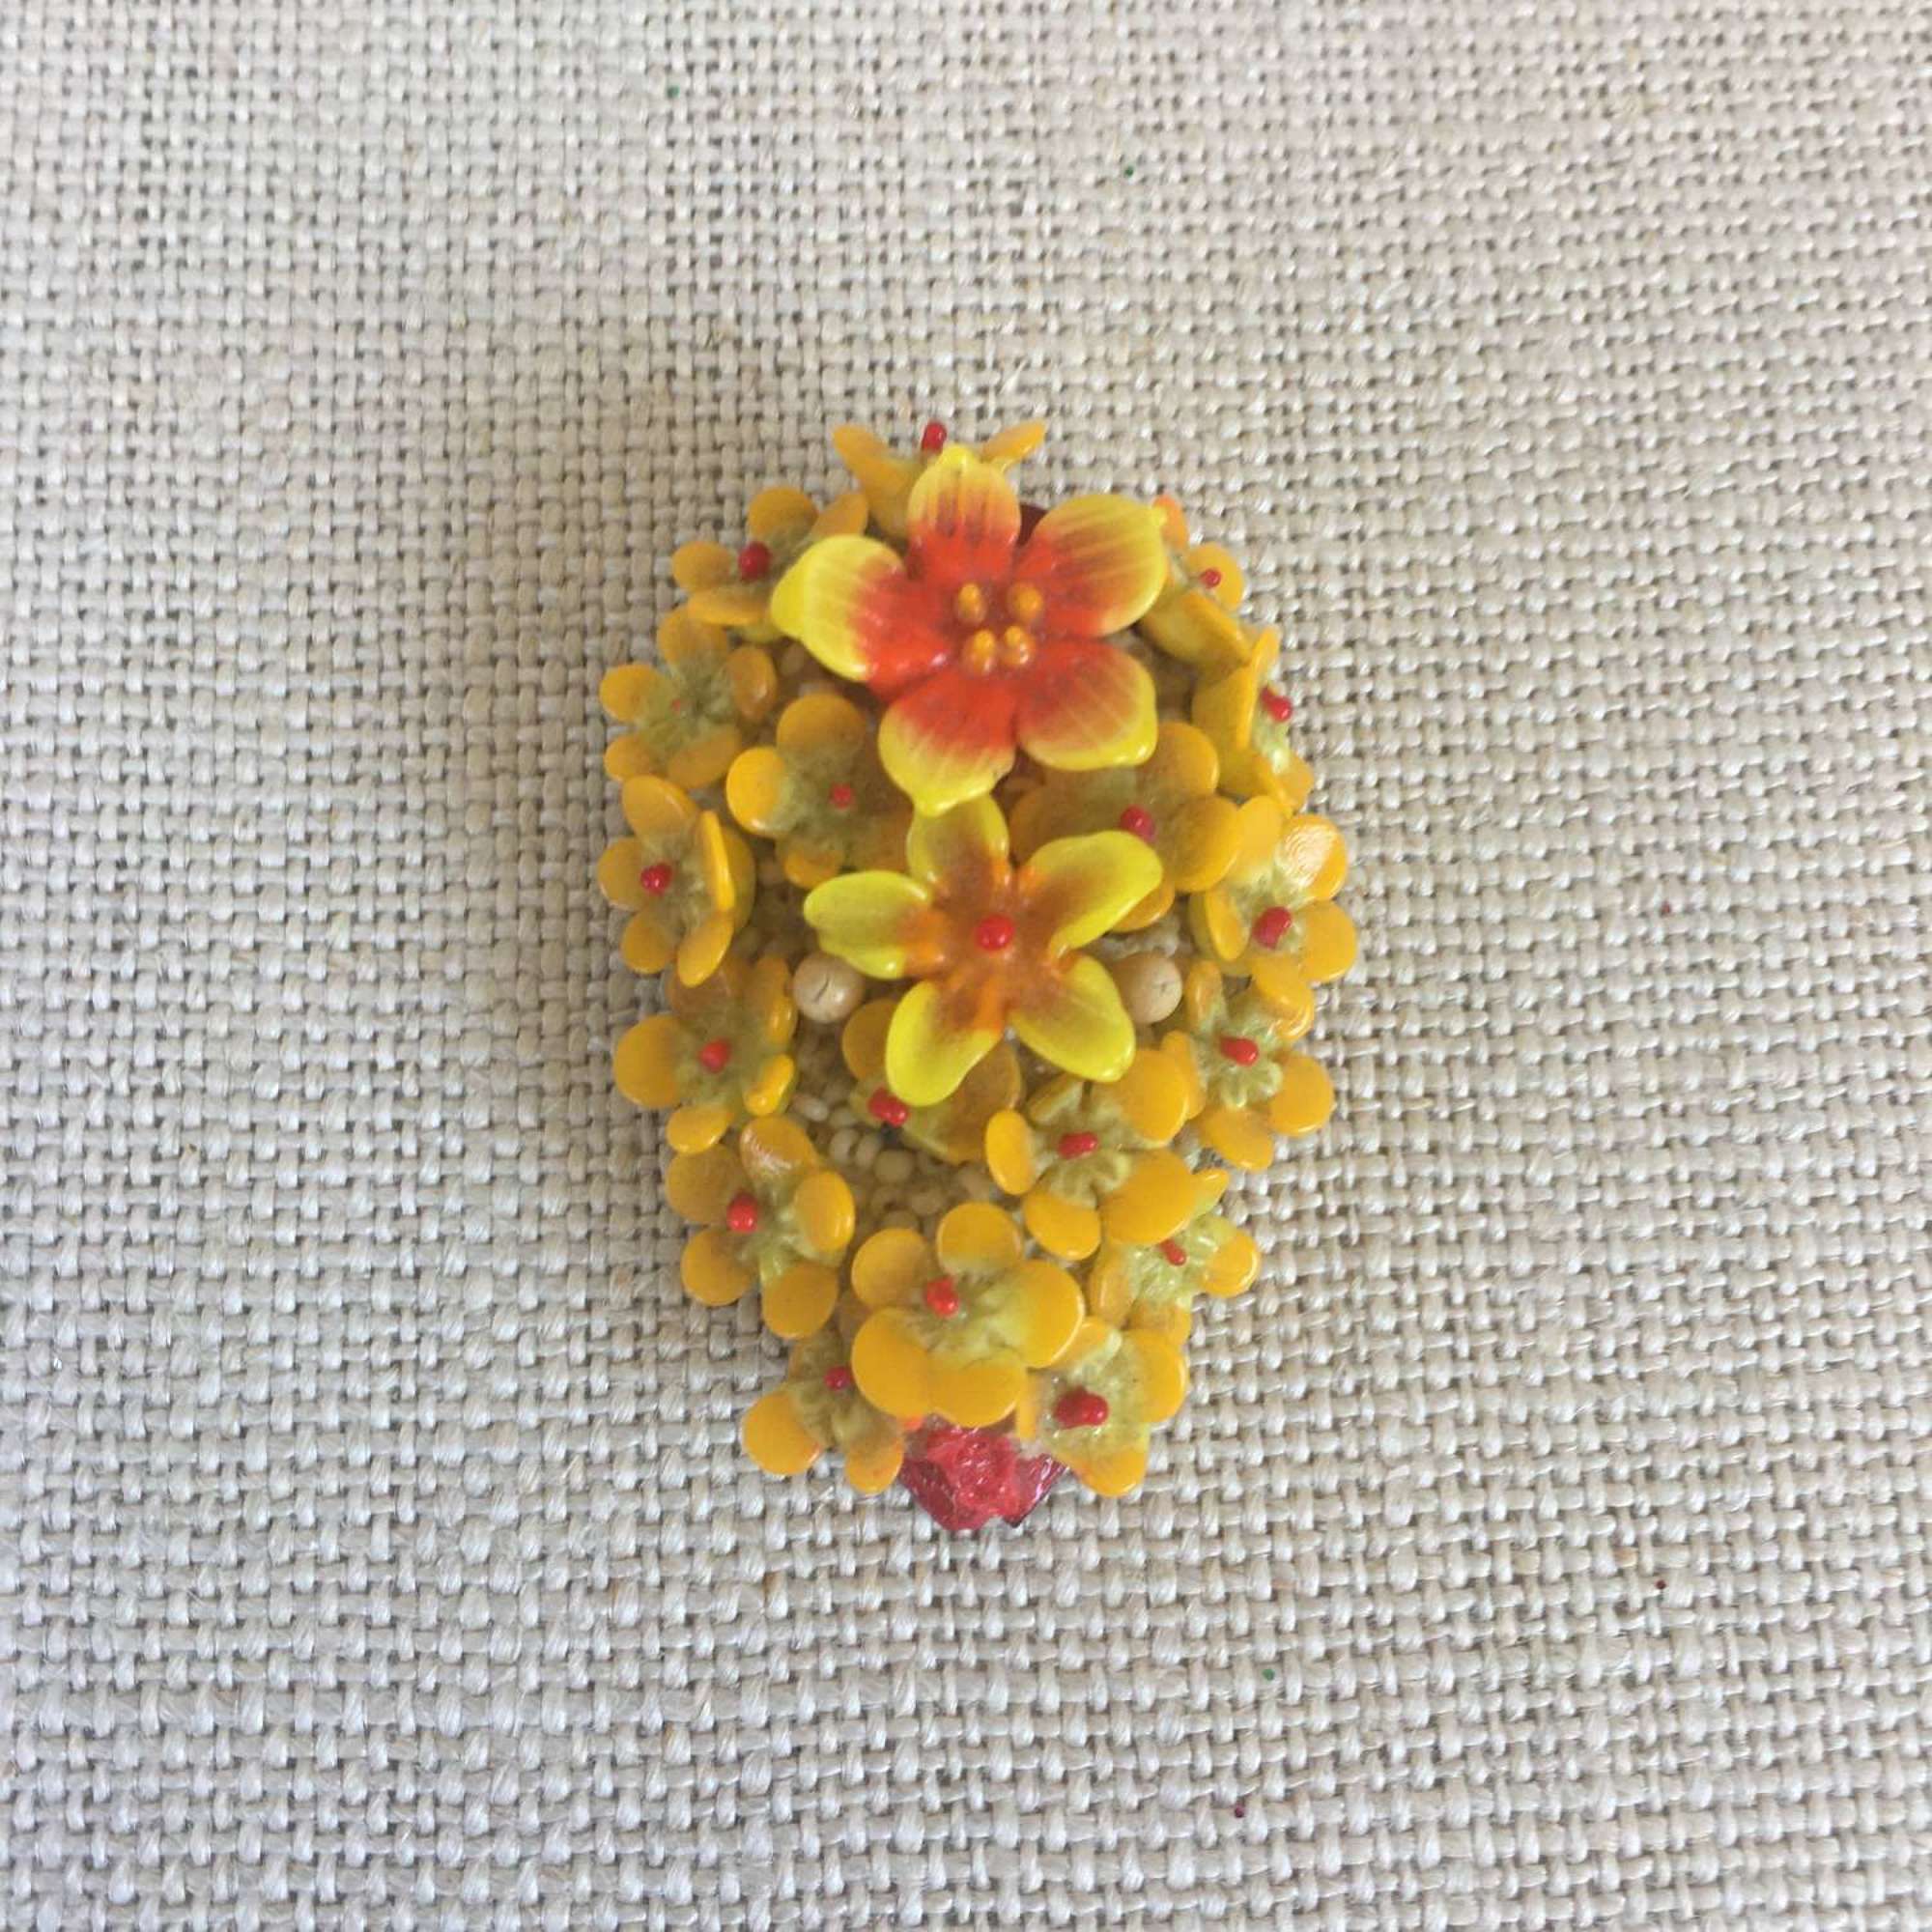 Vintage plastic yellow red floral dress clip